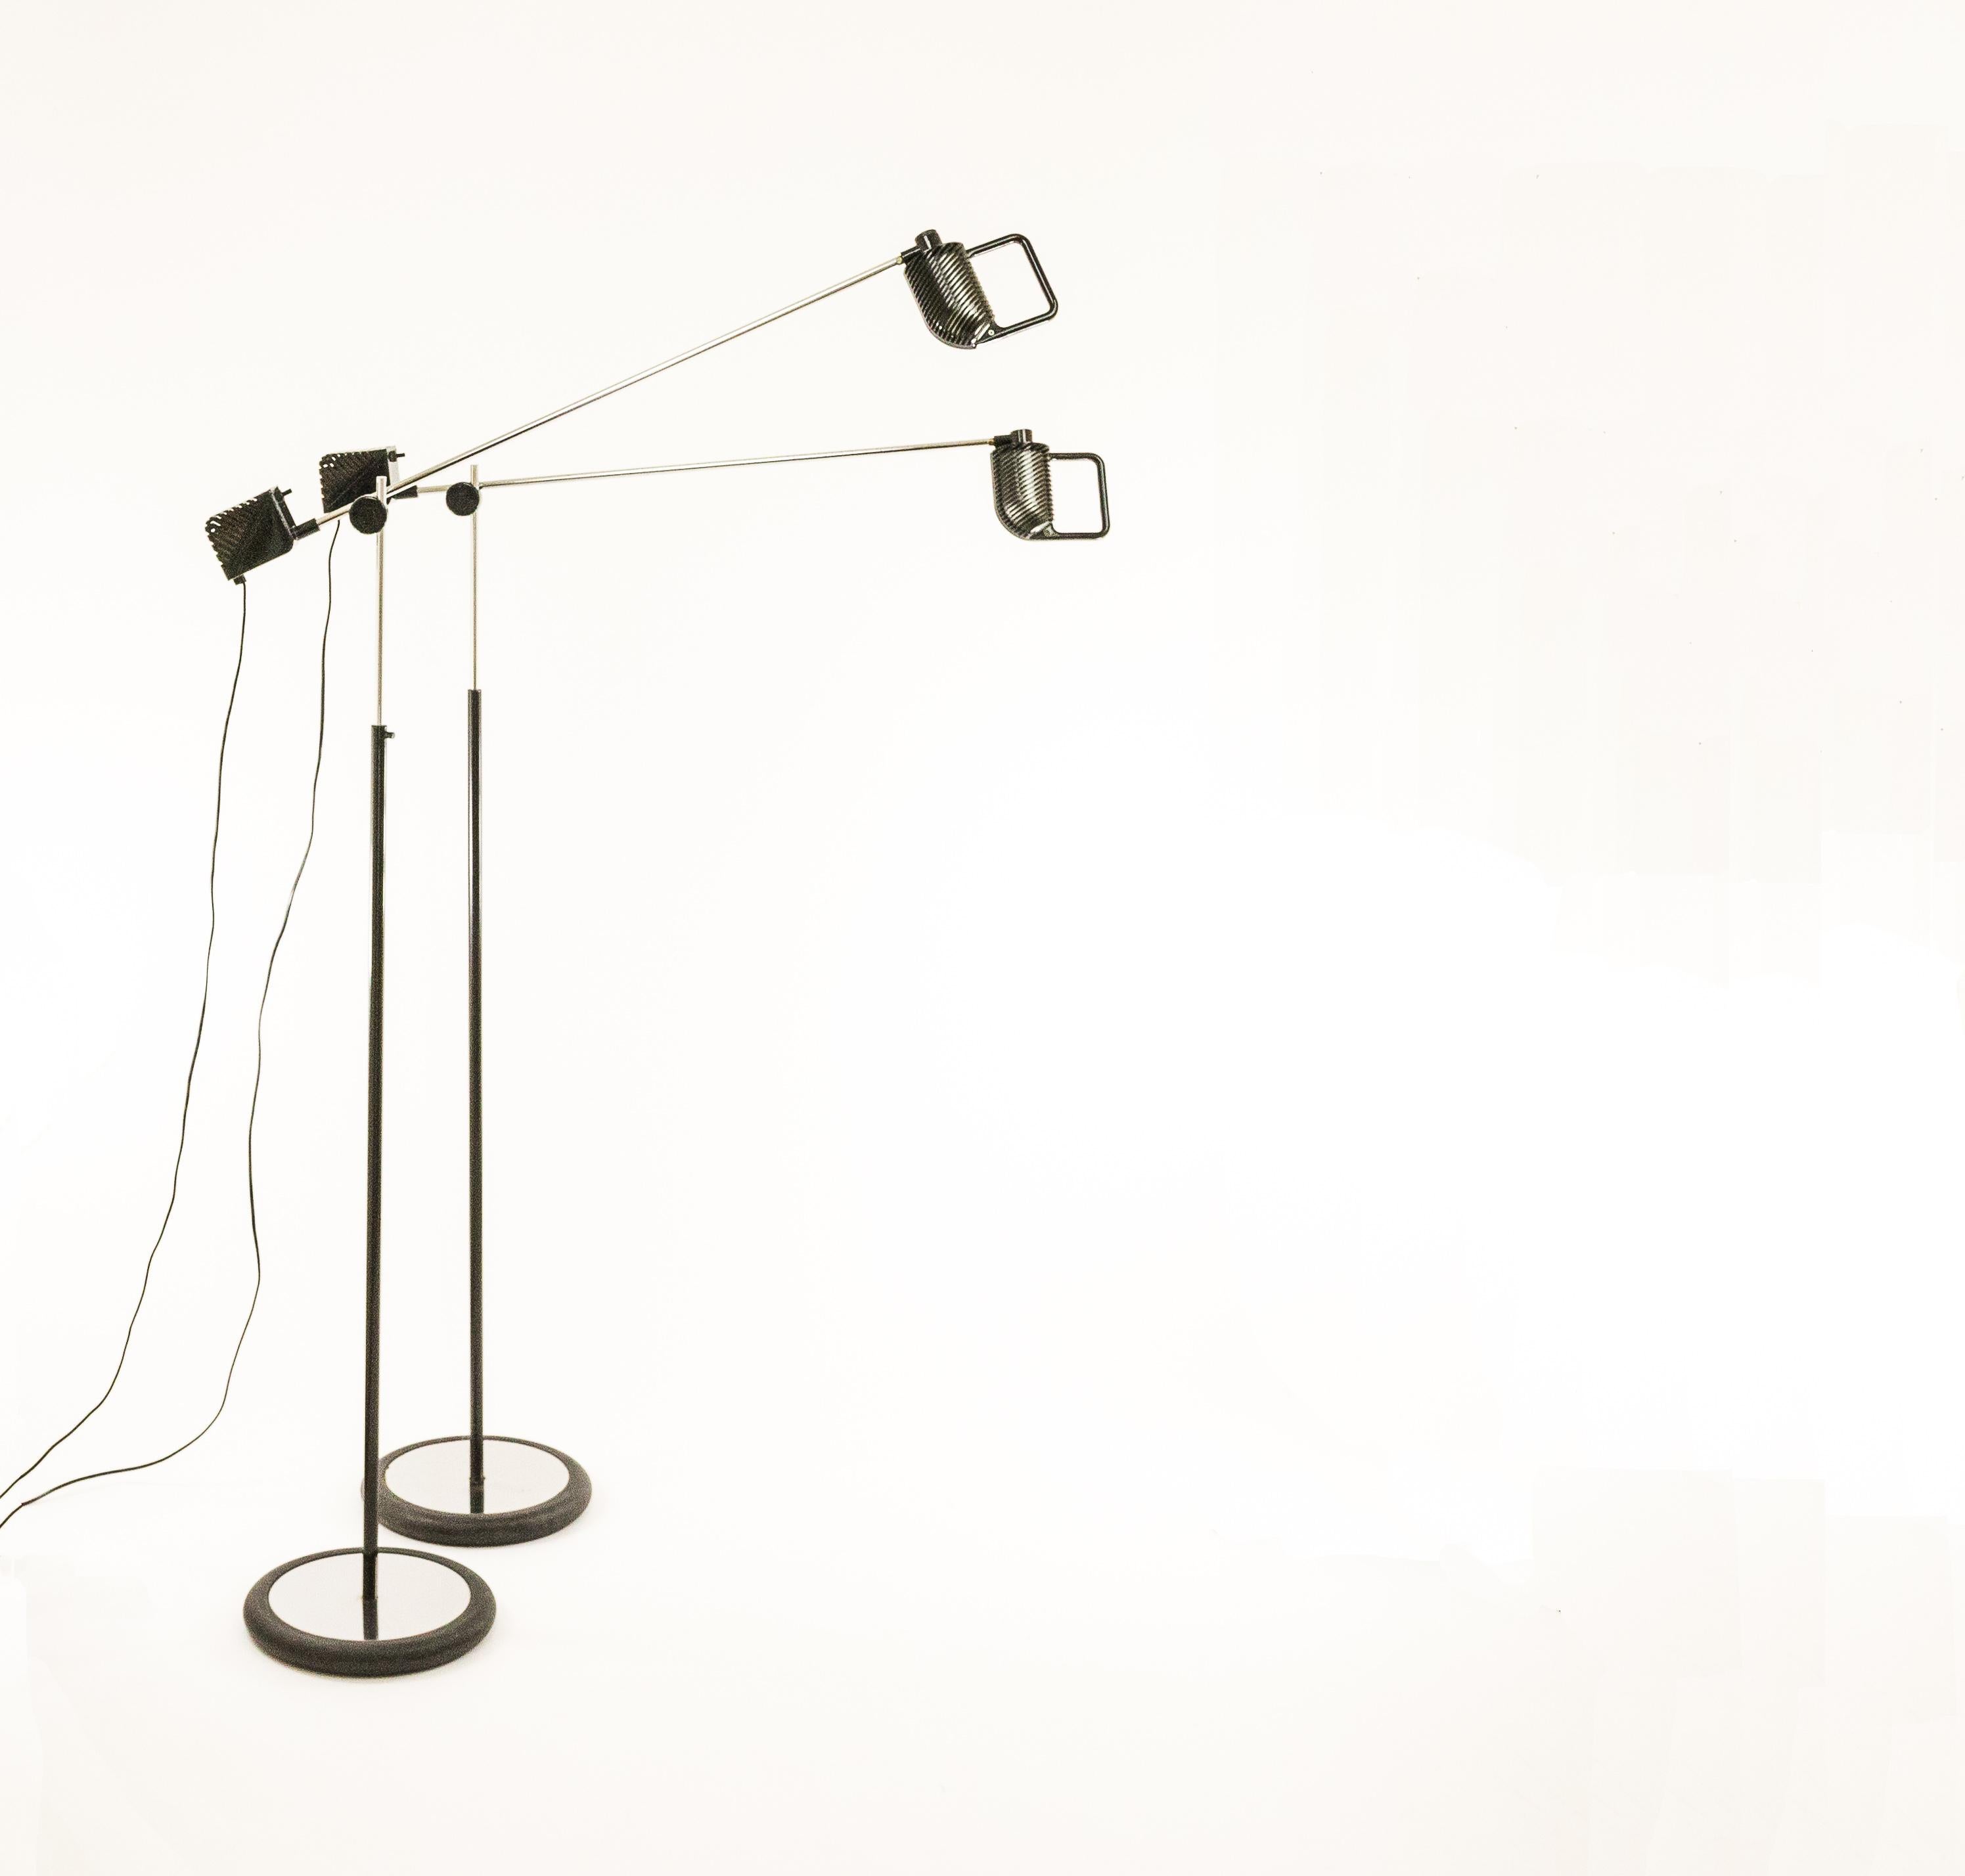 Pair of Maniglia floor lamps designed by Jonathan de Pas, Donato D'Urbino and Paolo Lomazzi for Italian lighting manufacturer Stilnovo.

We found the following description in a Stilnovo advertisement from 1975 -translated from Italian-: 